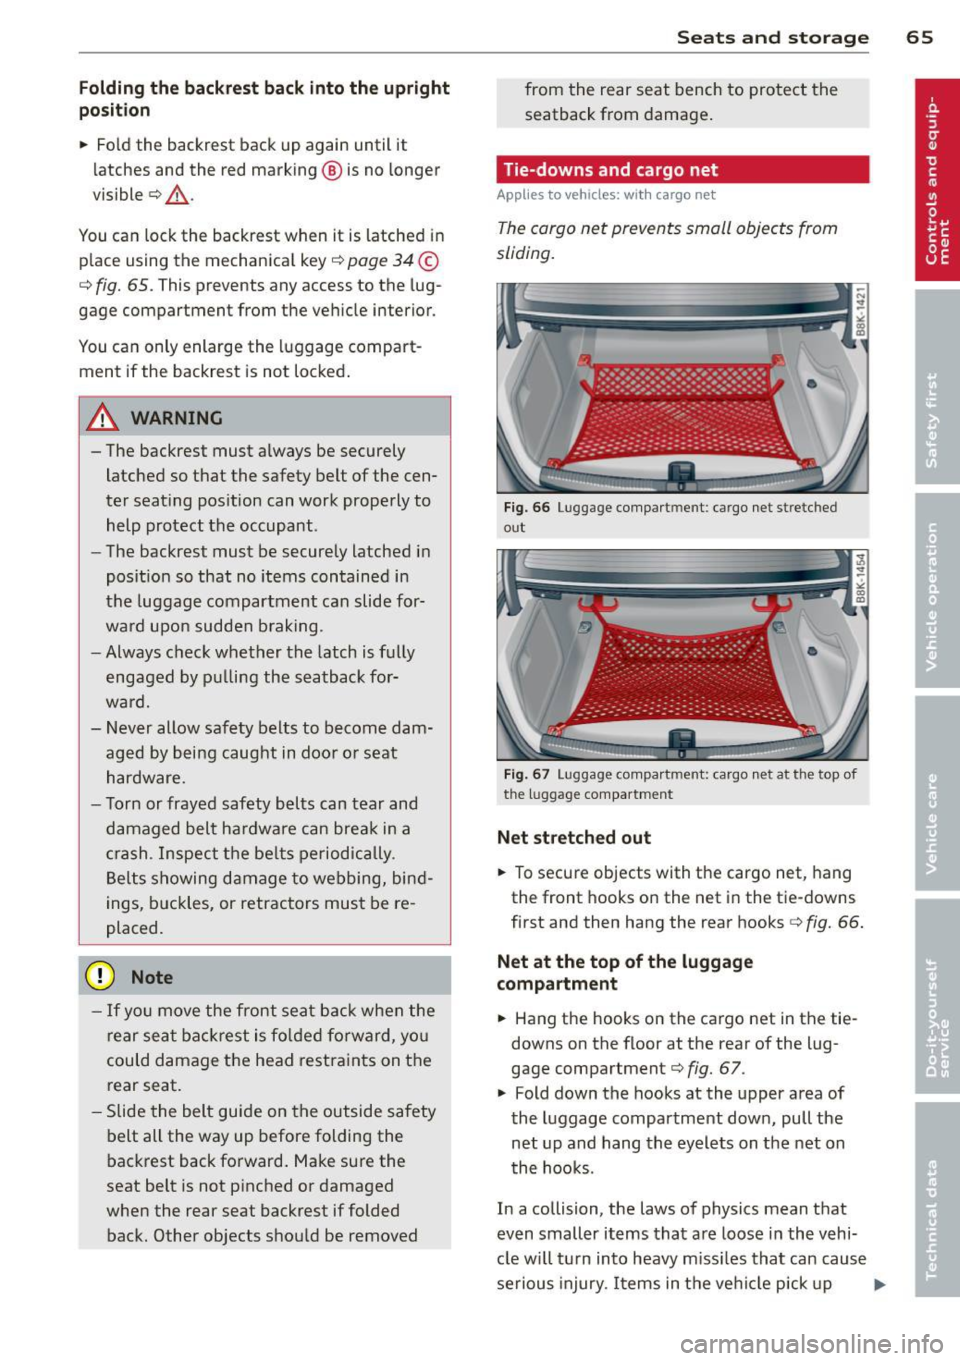 AUDI S4 SEDAN 2013  Owners Manual Folding the  backrest back  into the  upright 
position 
•  Fold the  backrest  back  up  again  until  it 
latches  and the  red  marking @ is no  longer 
visible ¢&_ . 
You  can  lock the  backre